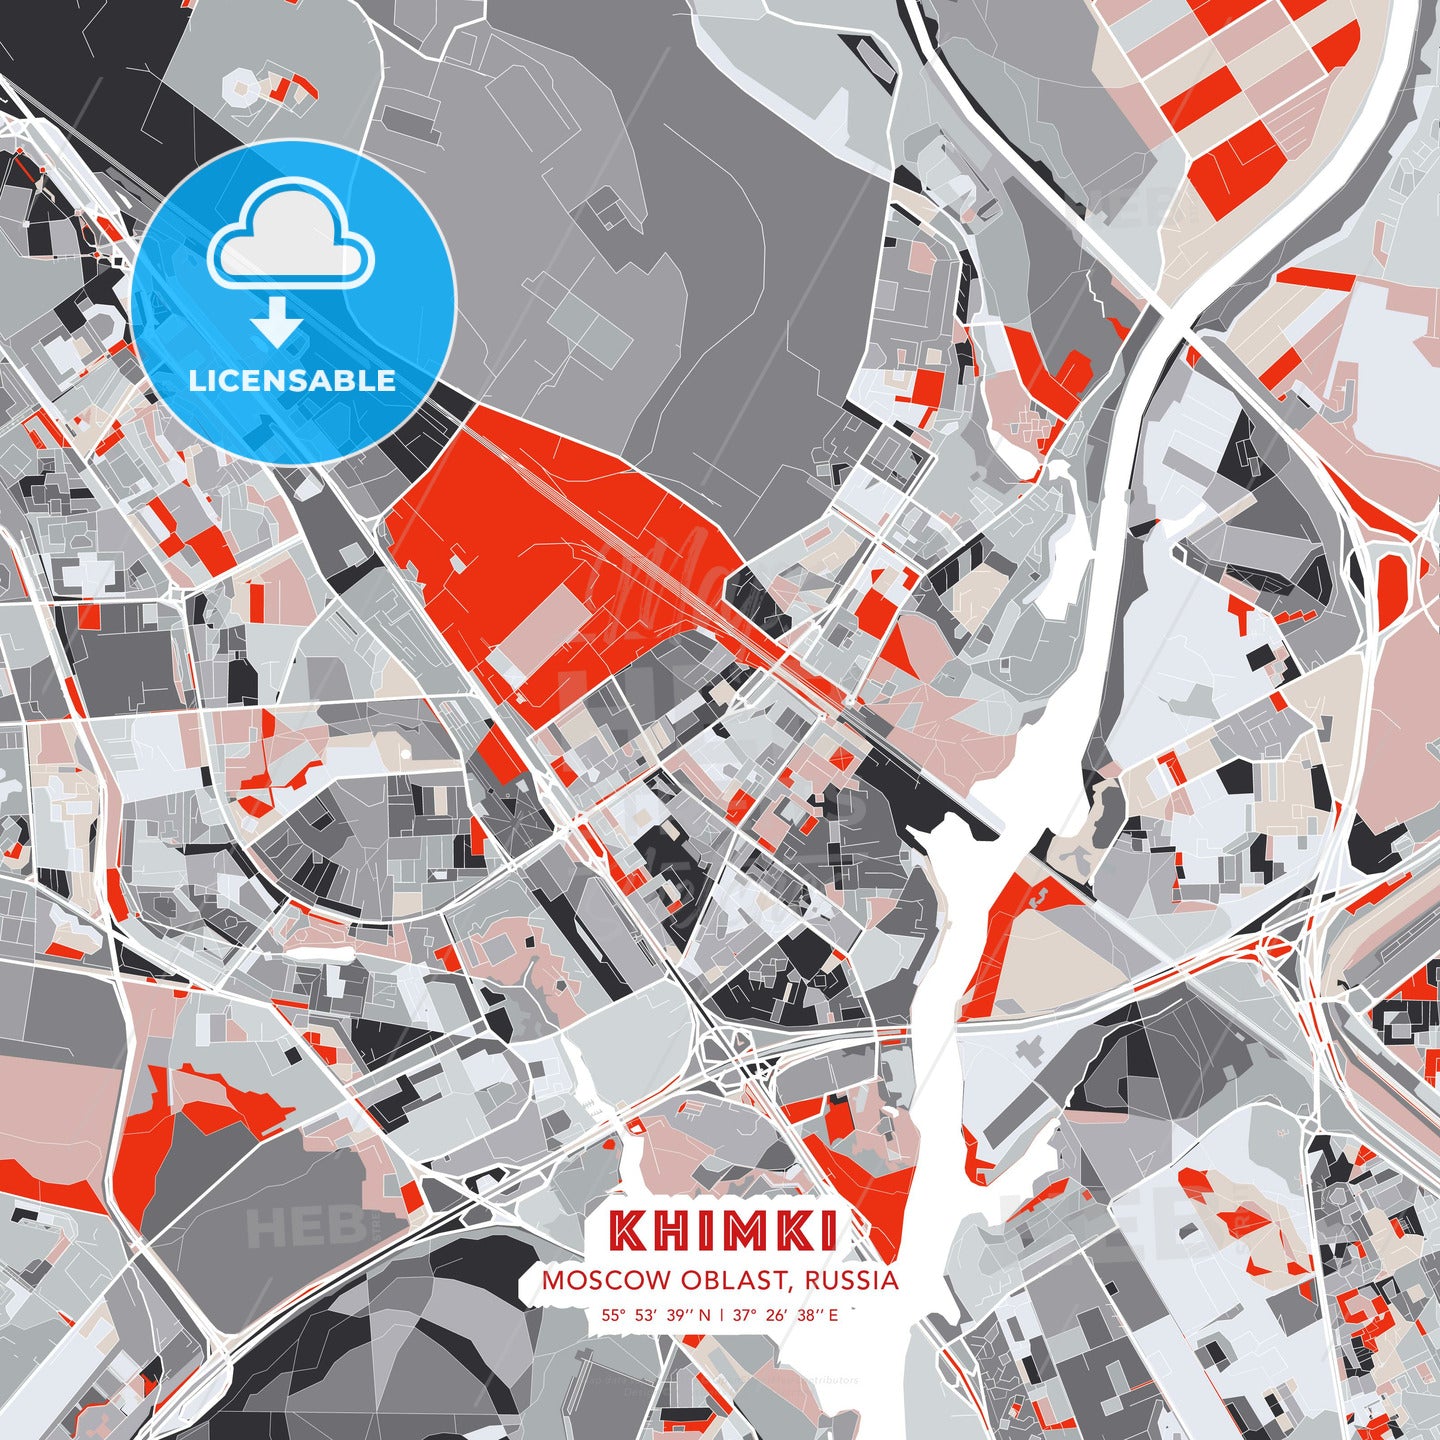 Khimki, Moscow Oblast, Russia, modern map - HEBSTREITS Sketches